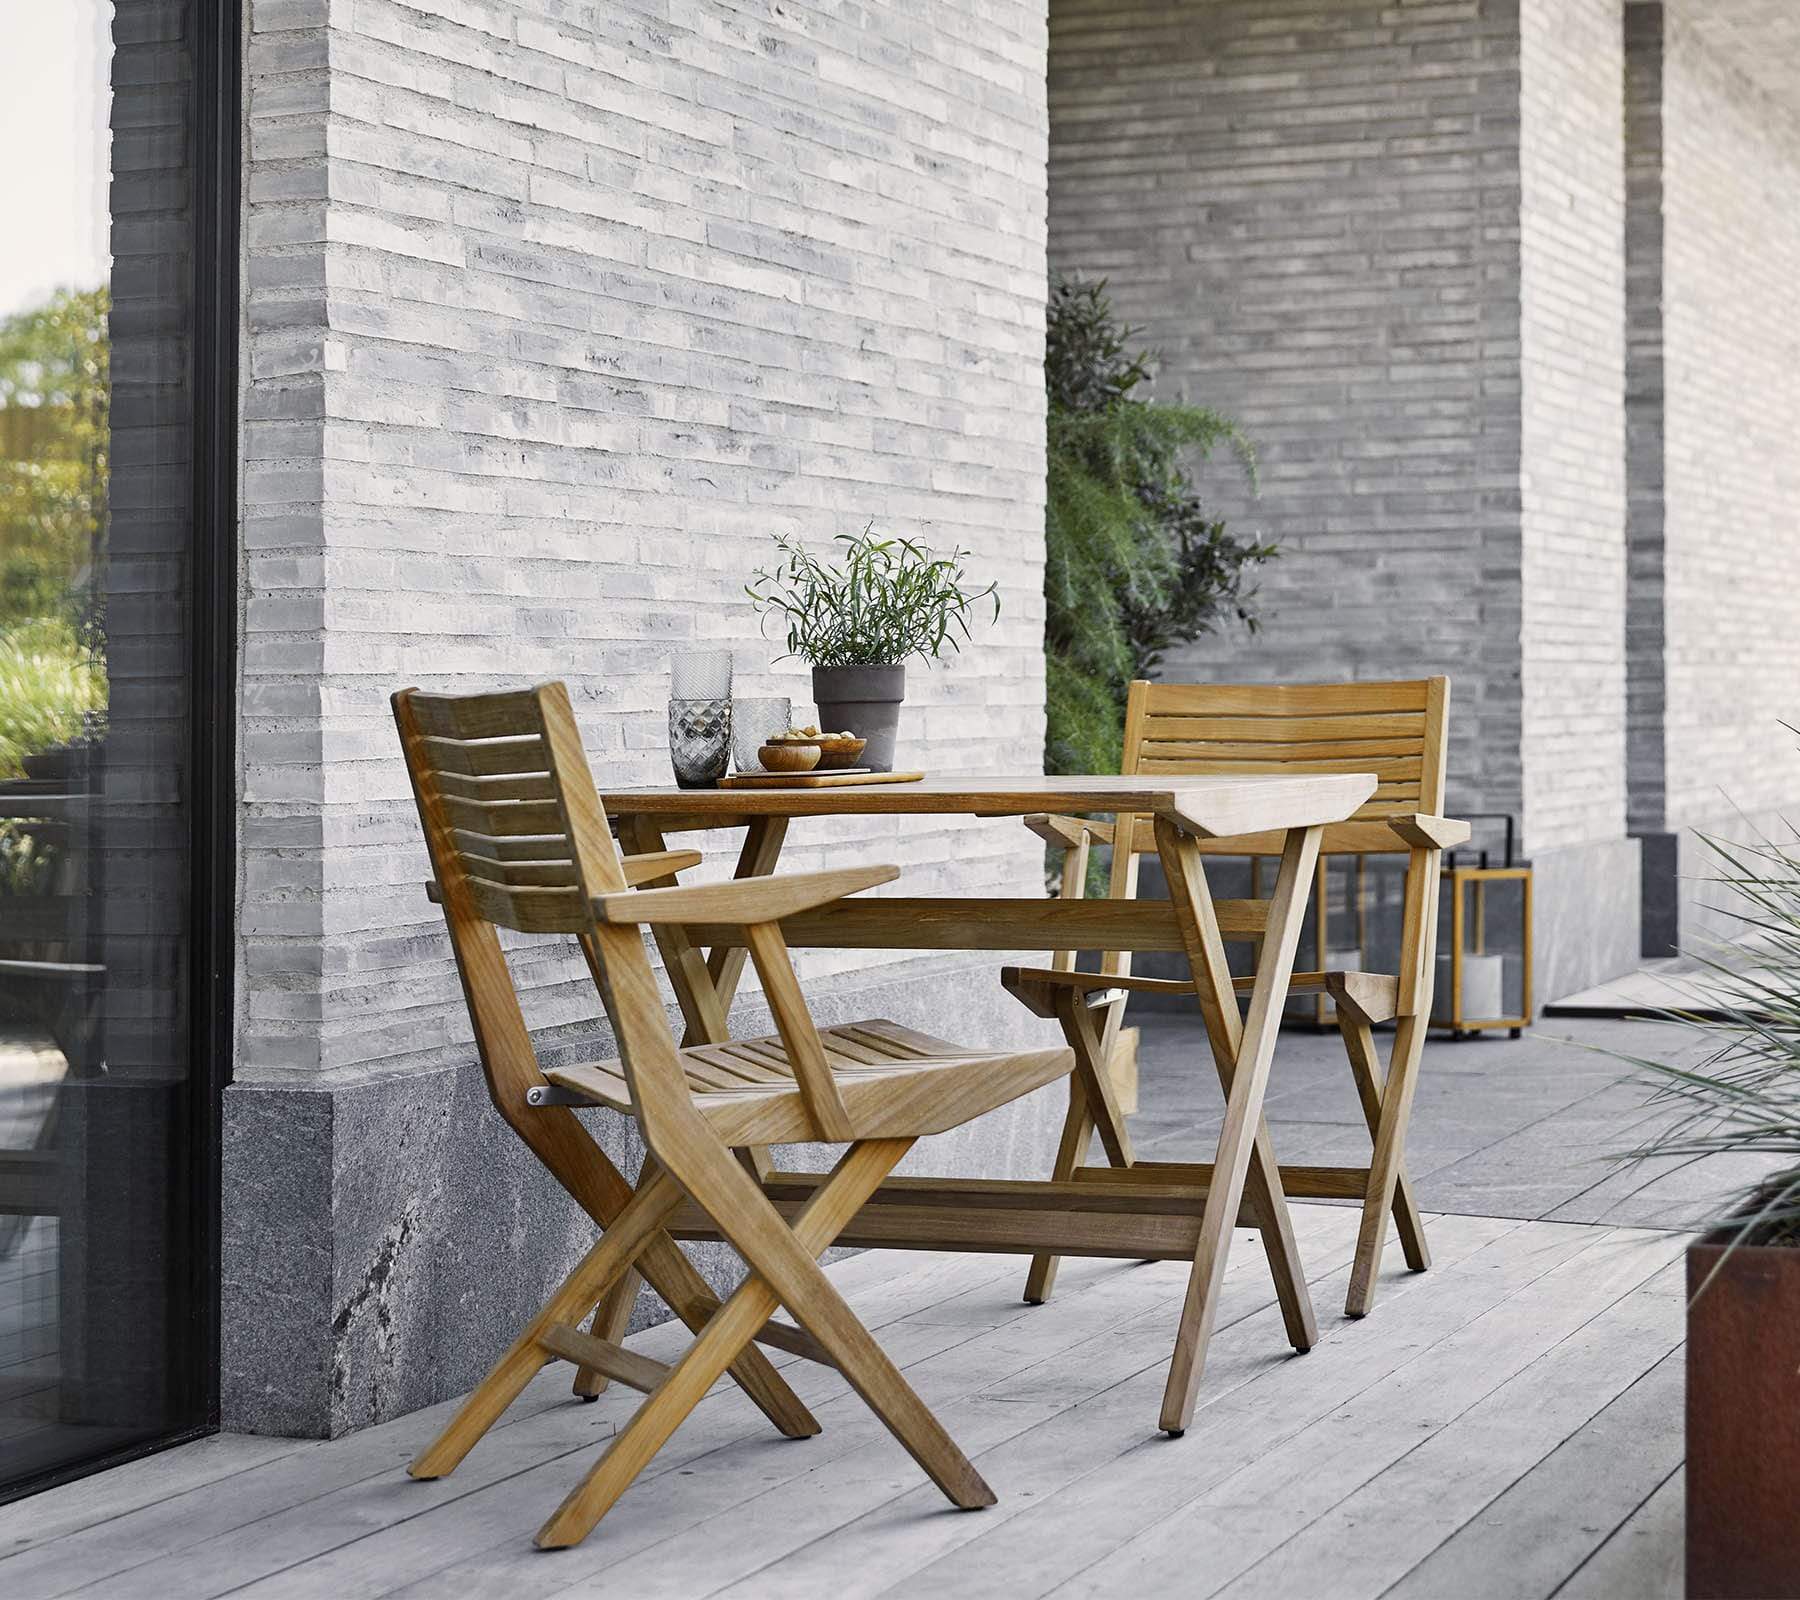 Boxhill's Flip Folding Outdoor Teak Dining Armchair lifestyle image with Flip Folding Outdoor Teak Dining Table at patio beside the wall